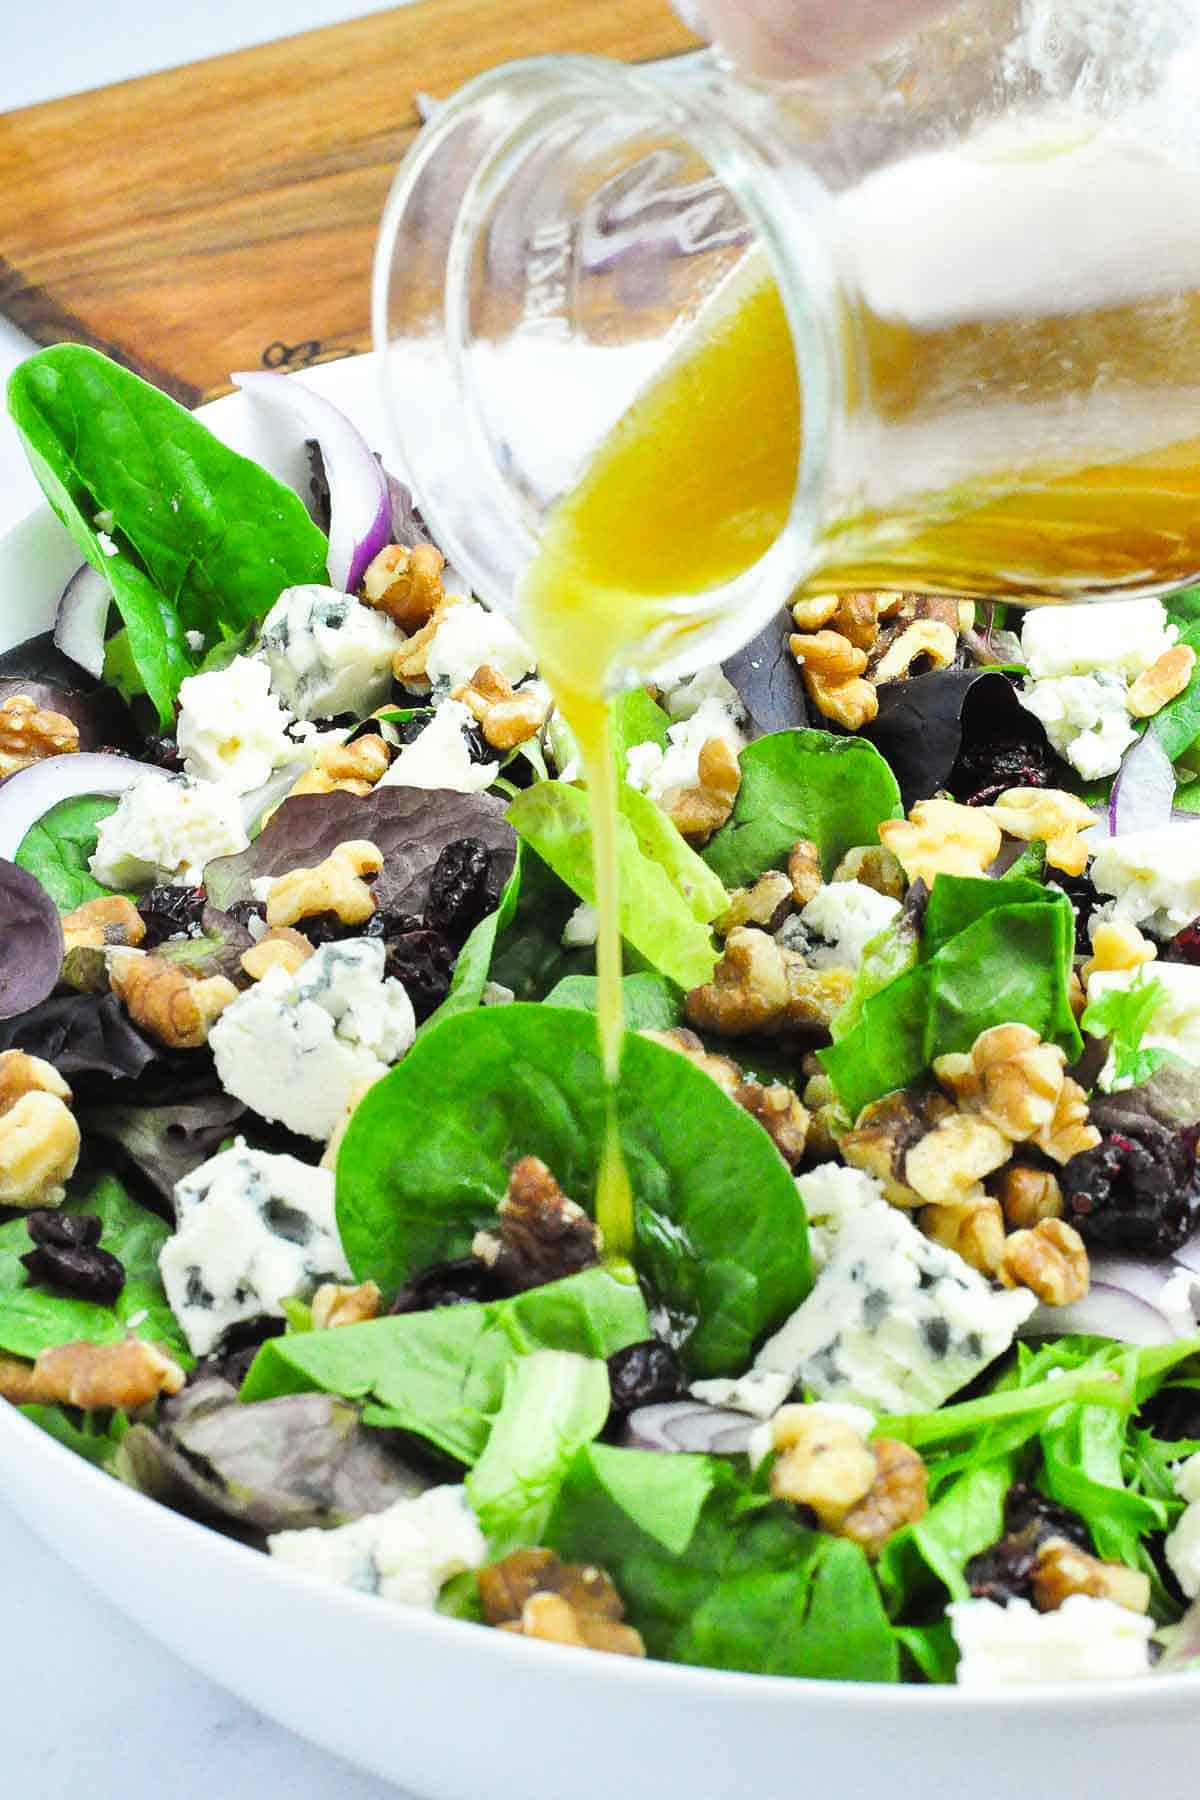 Drizzling maple balsamic dressing on to a salad made with blue cheese and walnuts.